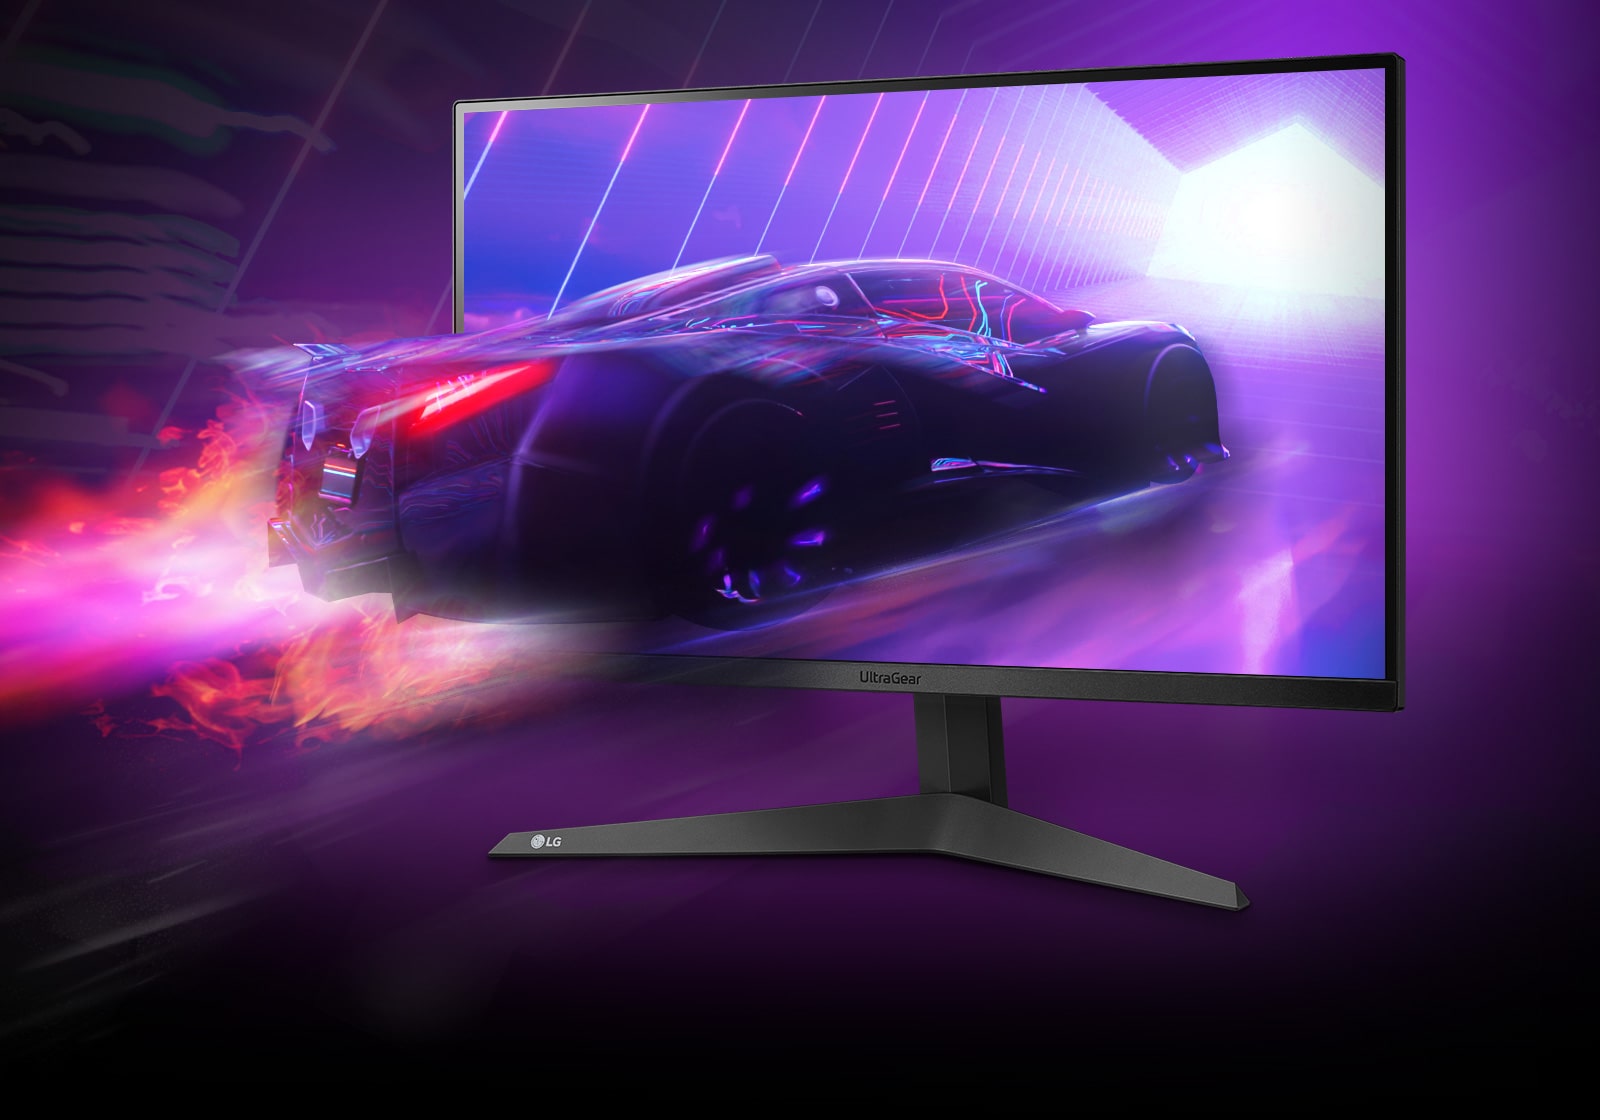 Enhance your gaming experience with the LG UltraGear™ monitor